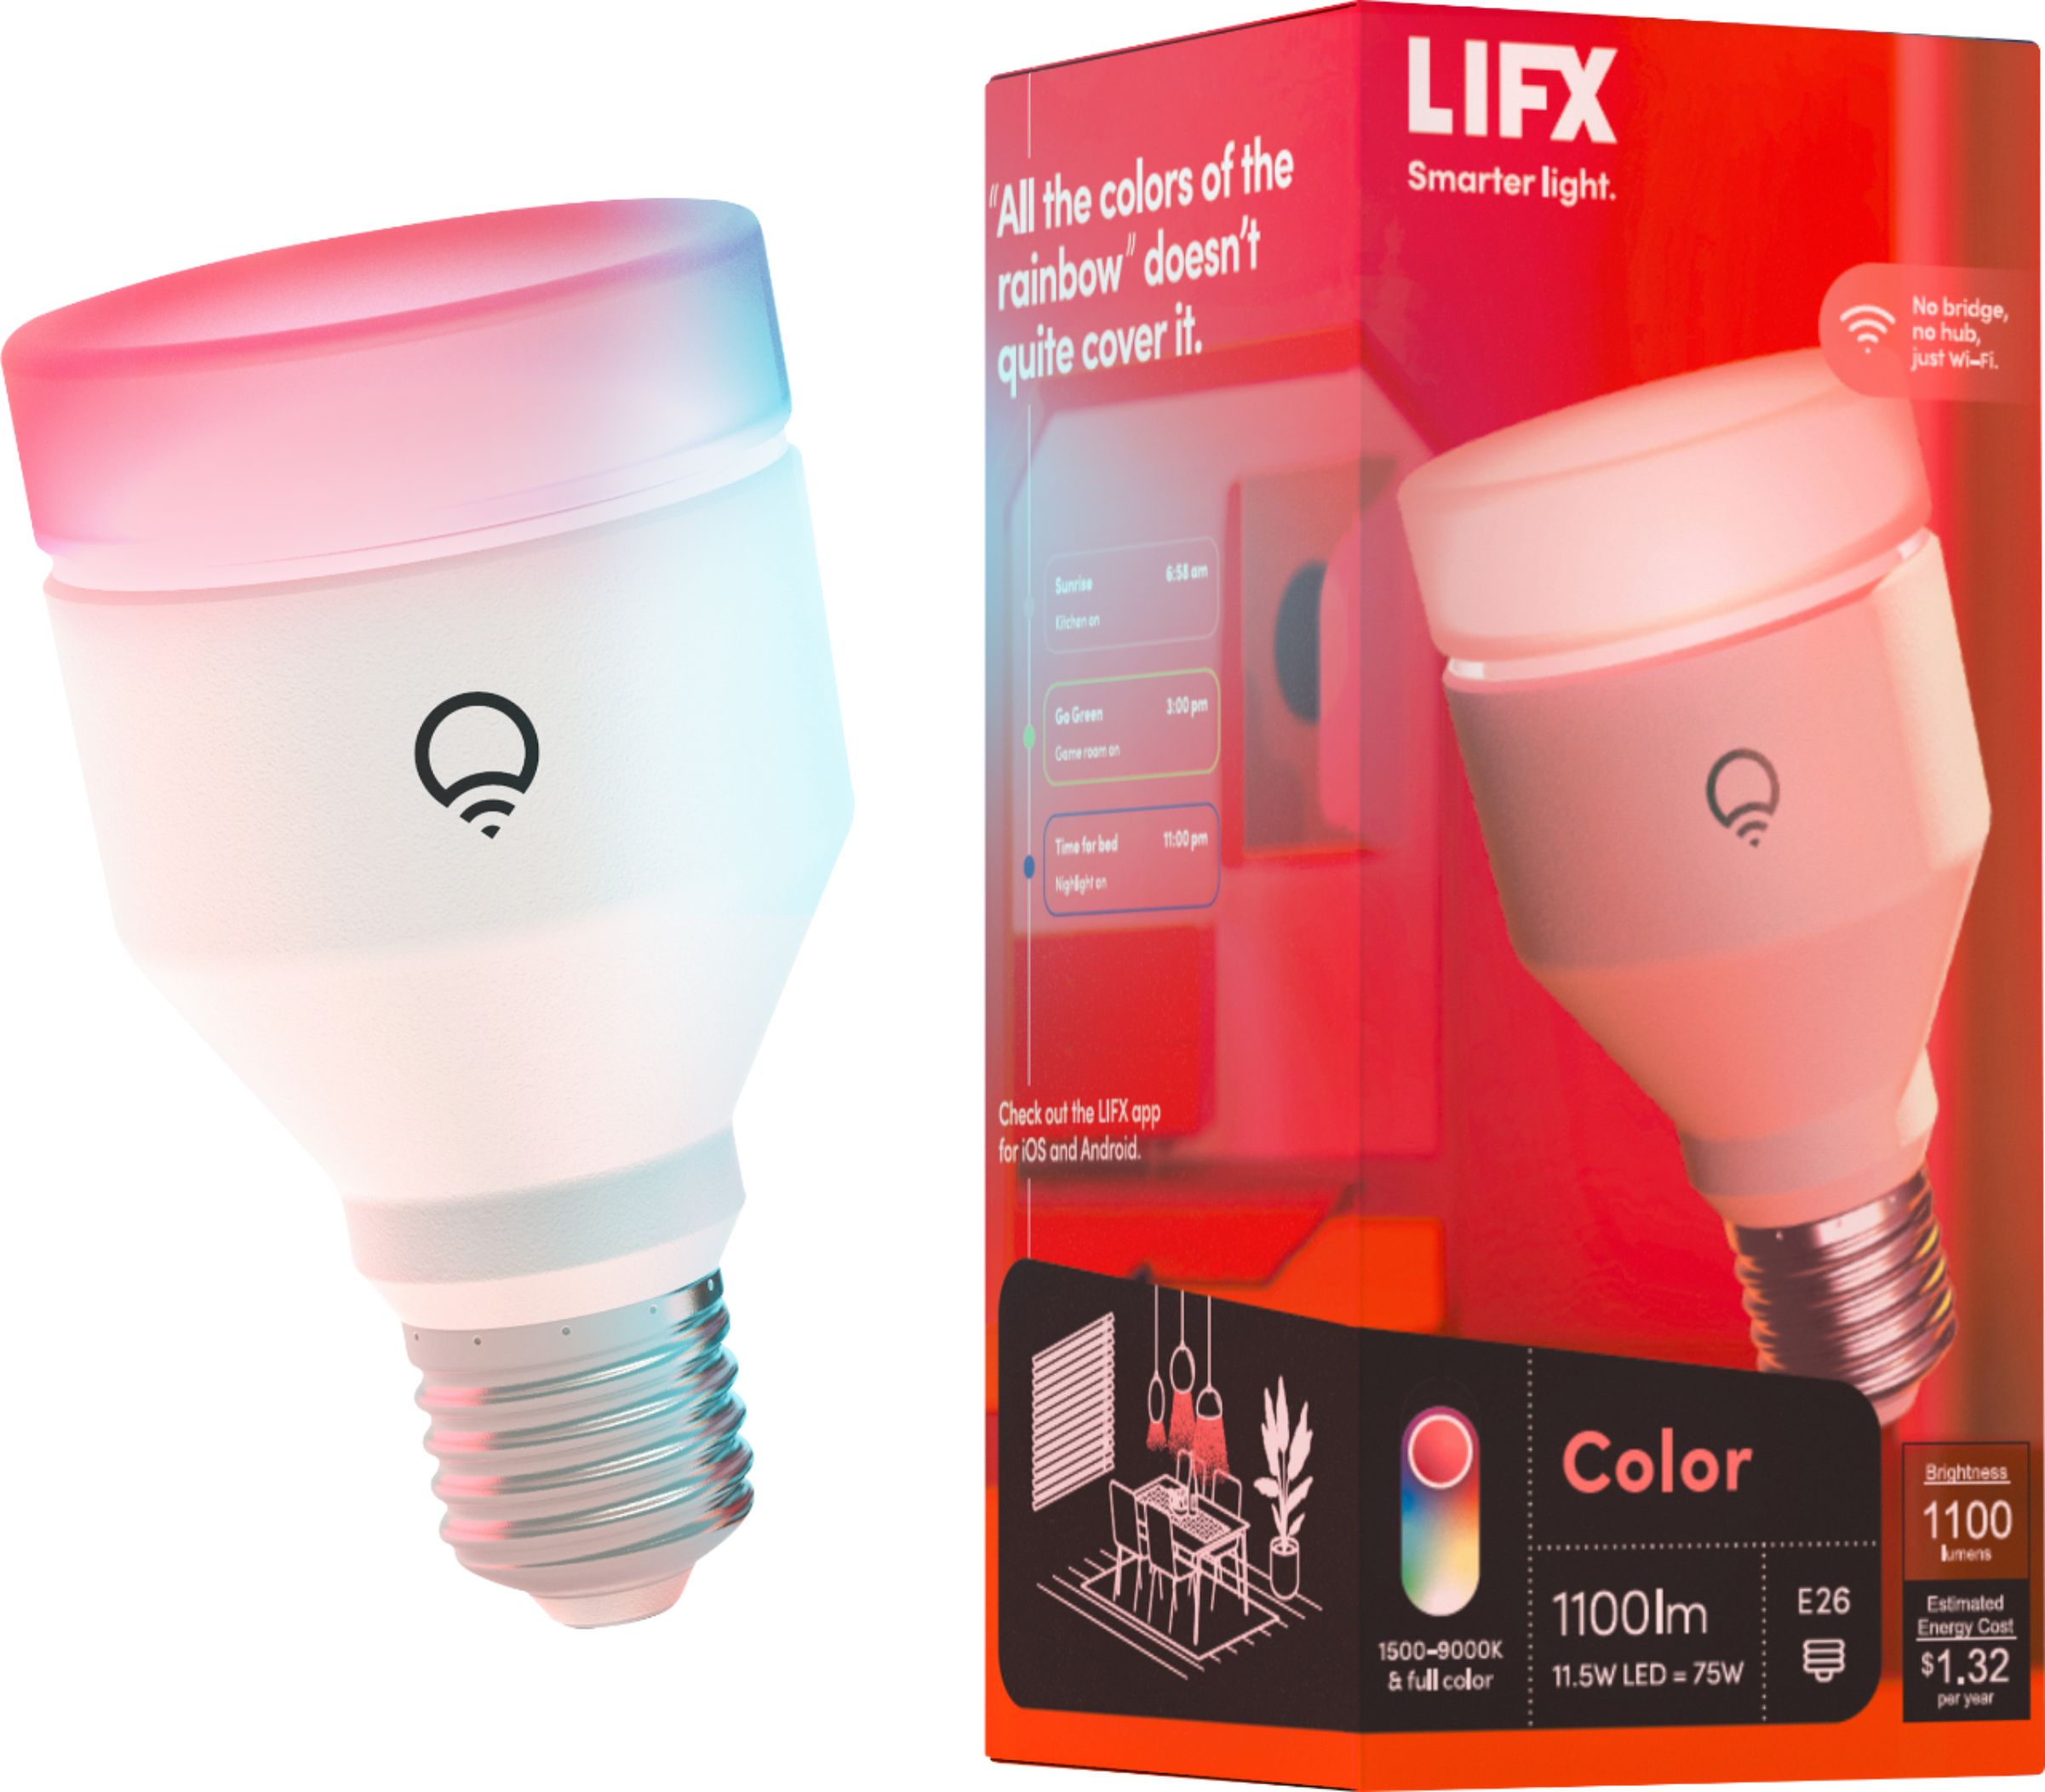 Philips Hue vs Lifx smart bulbs - which is better for you?